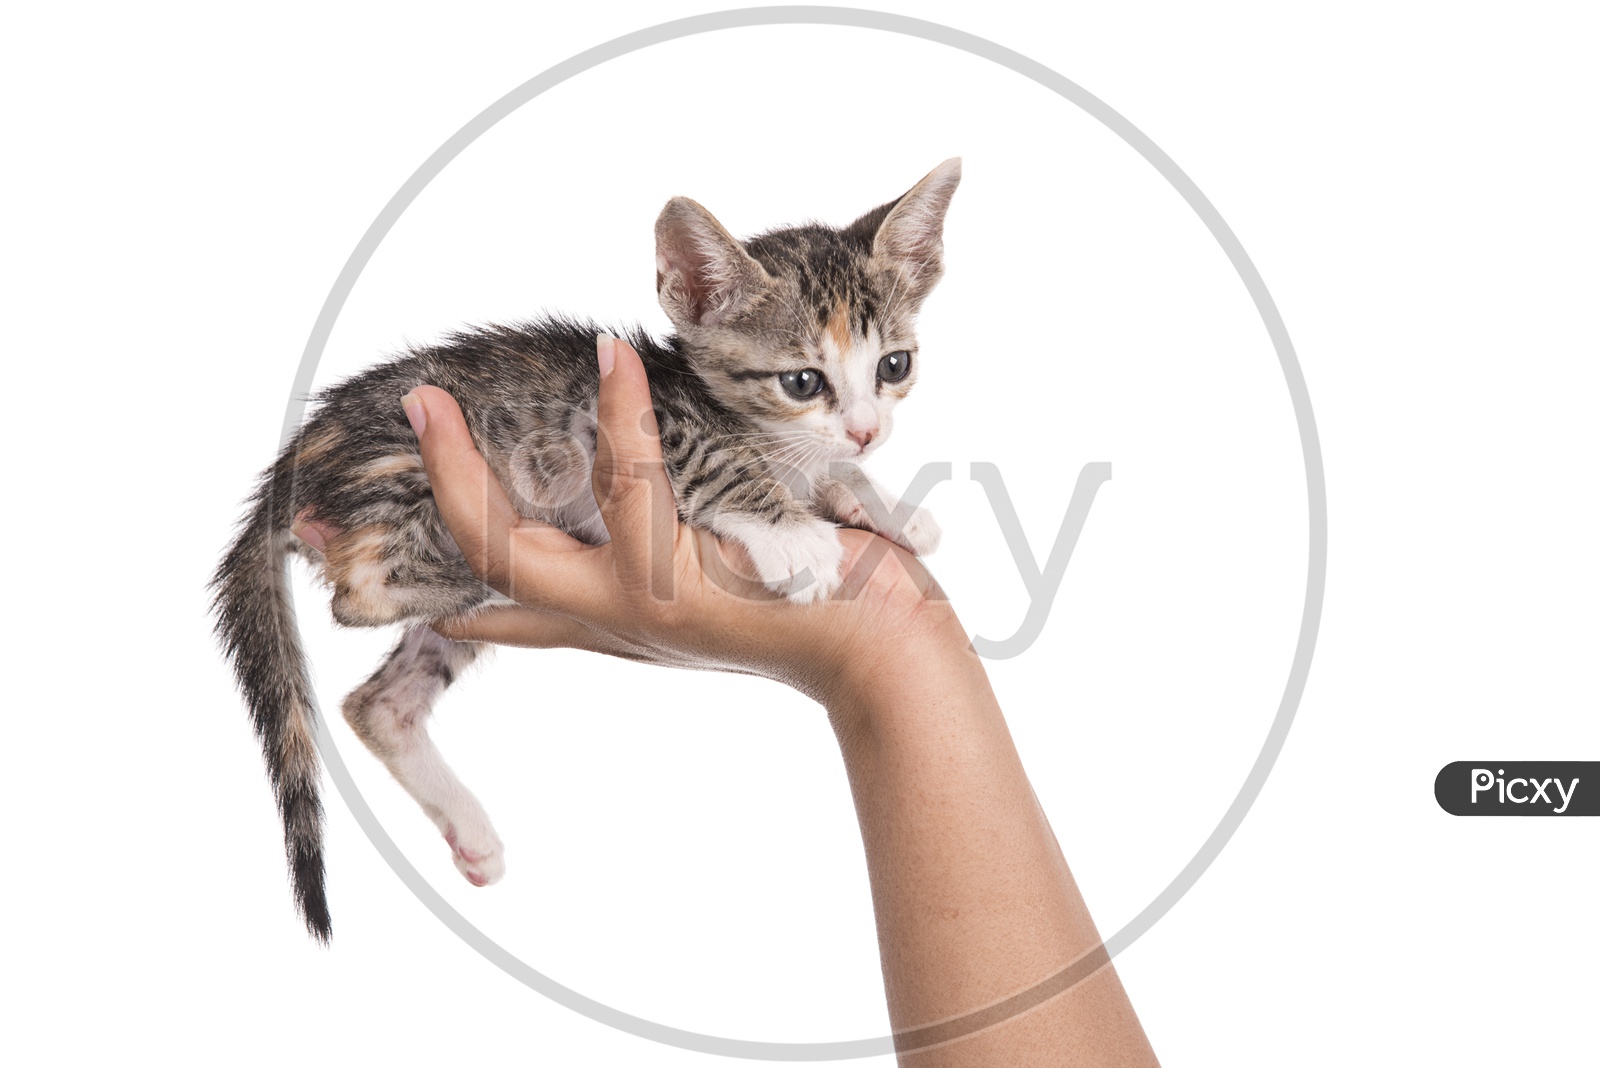 Cat Holding In a Hand Closeup  on an Isolated White Background